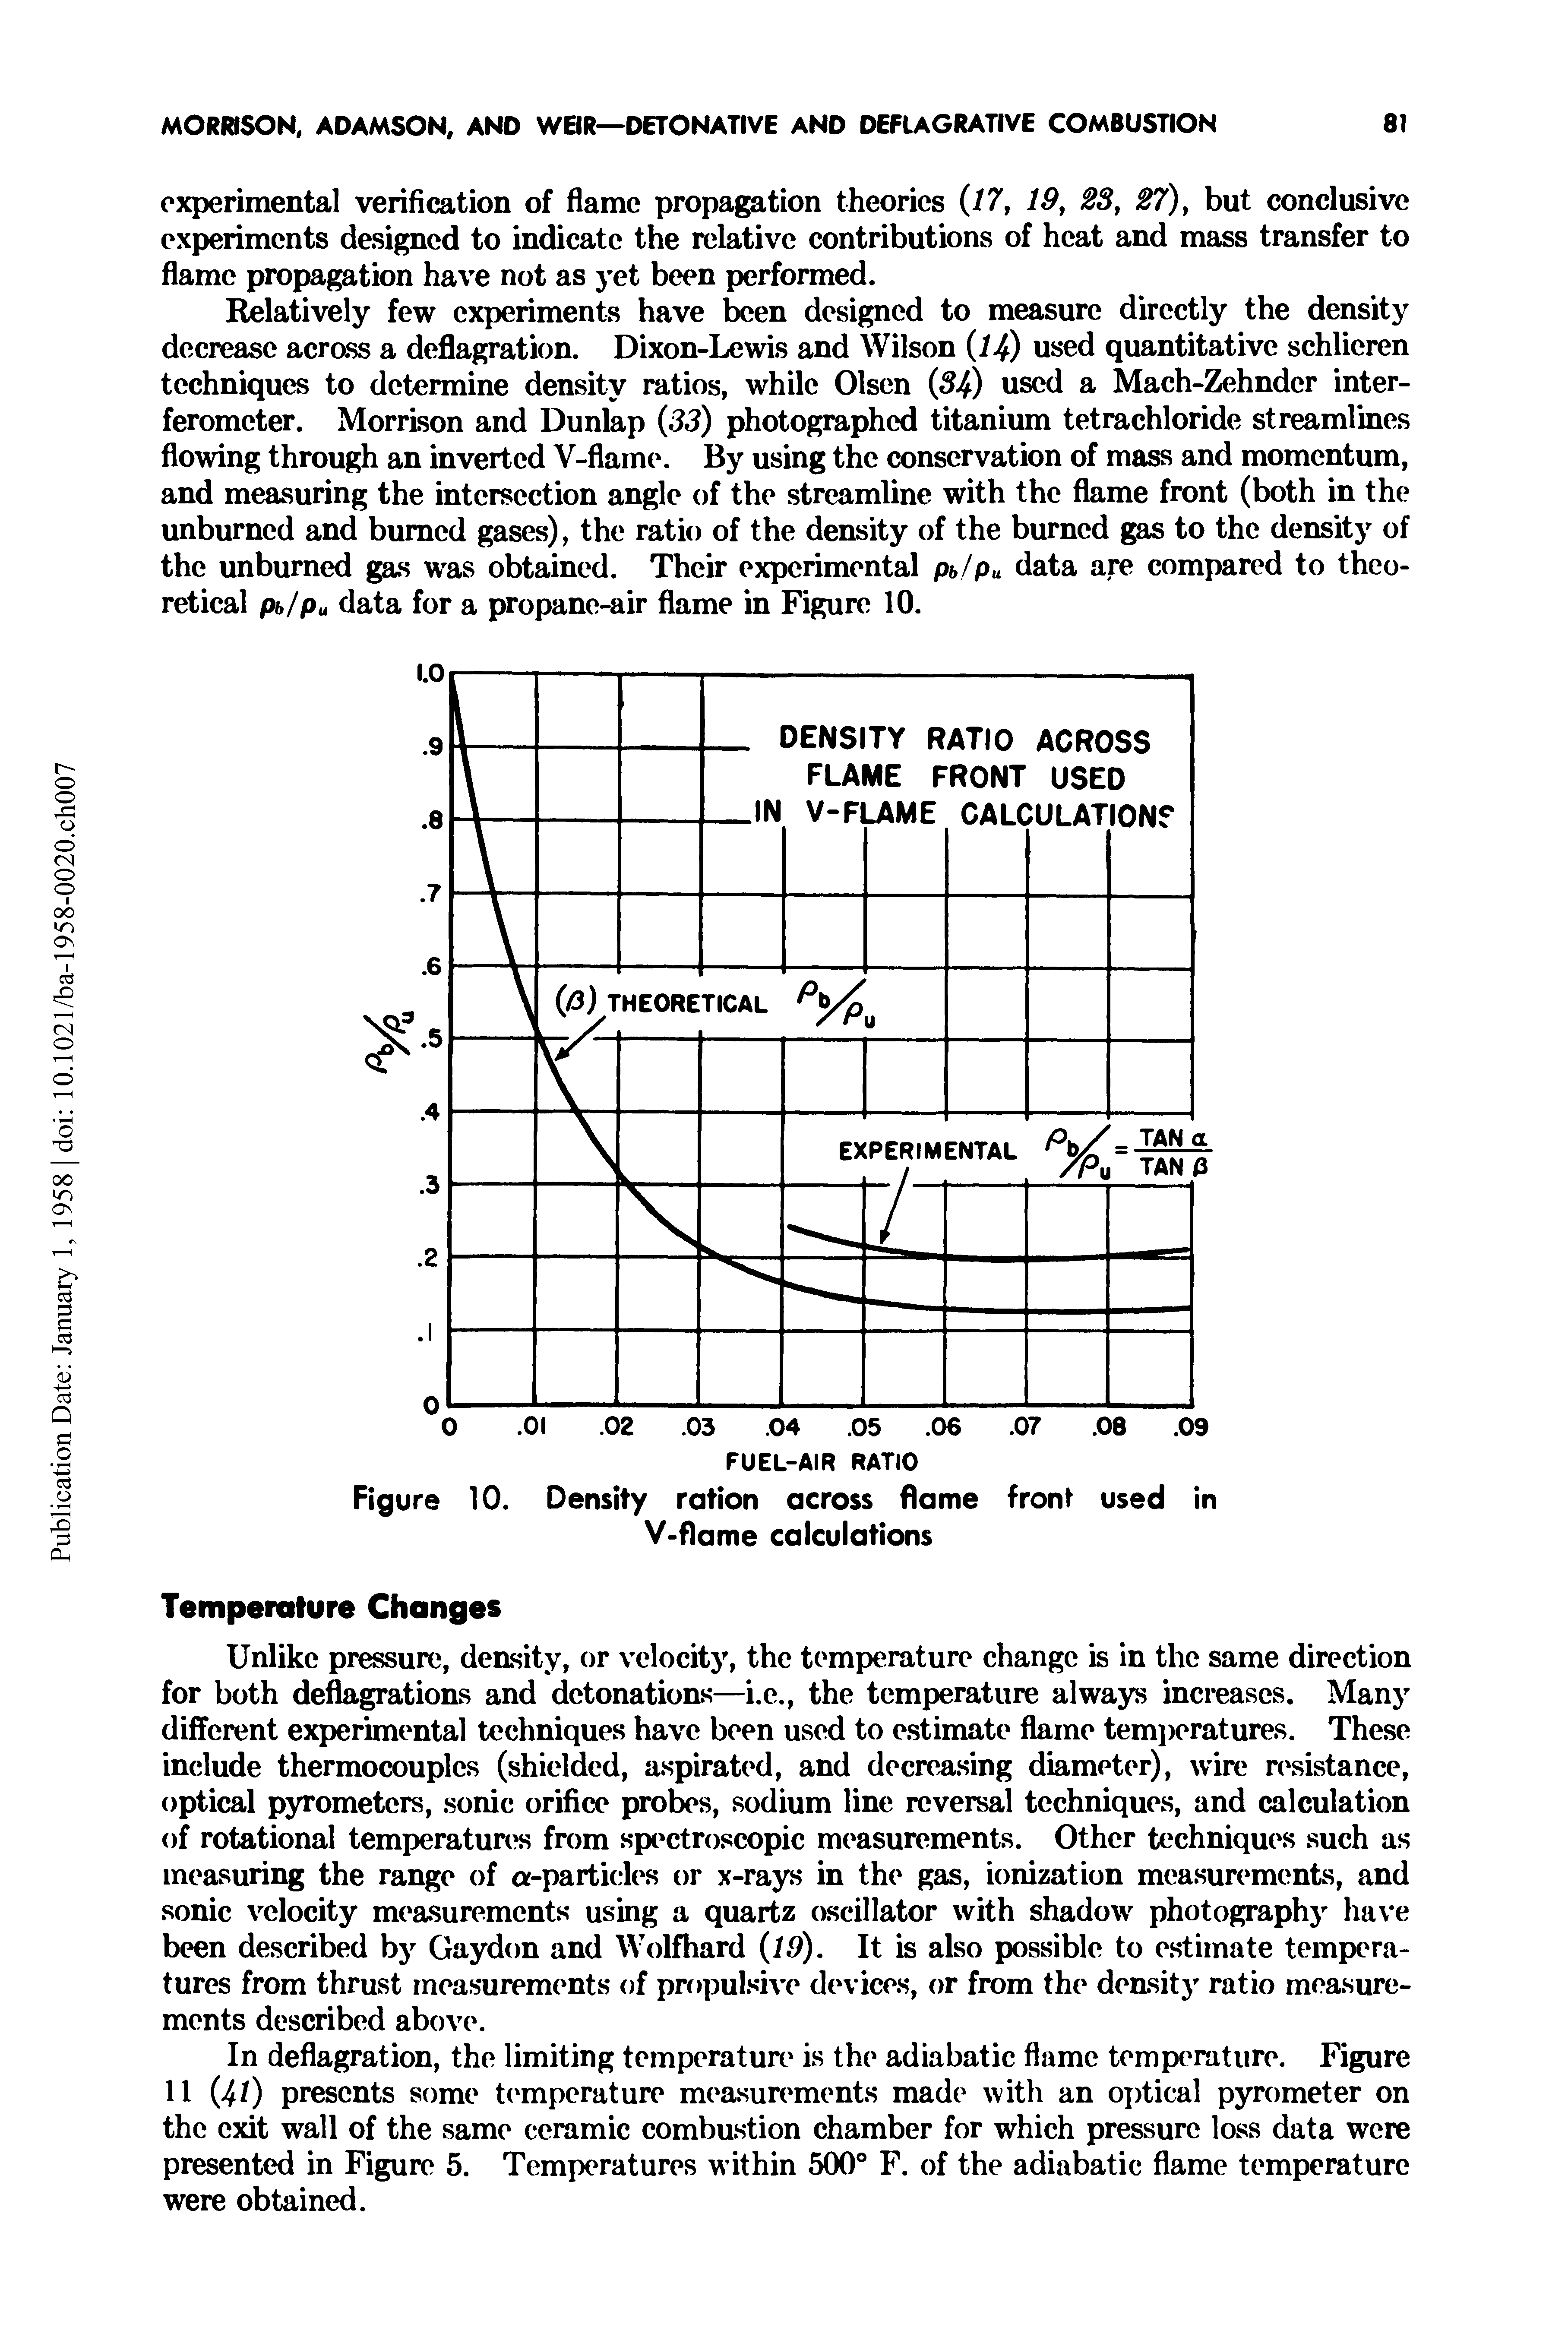 Figure 10. Density ration across flame front used in V-flame calculations...